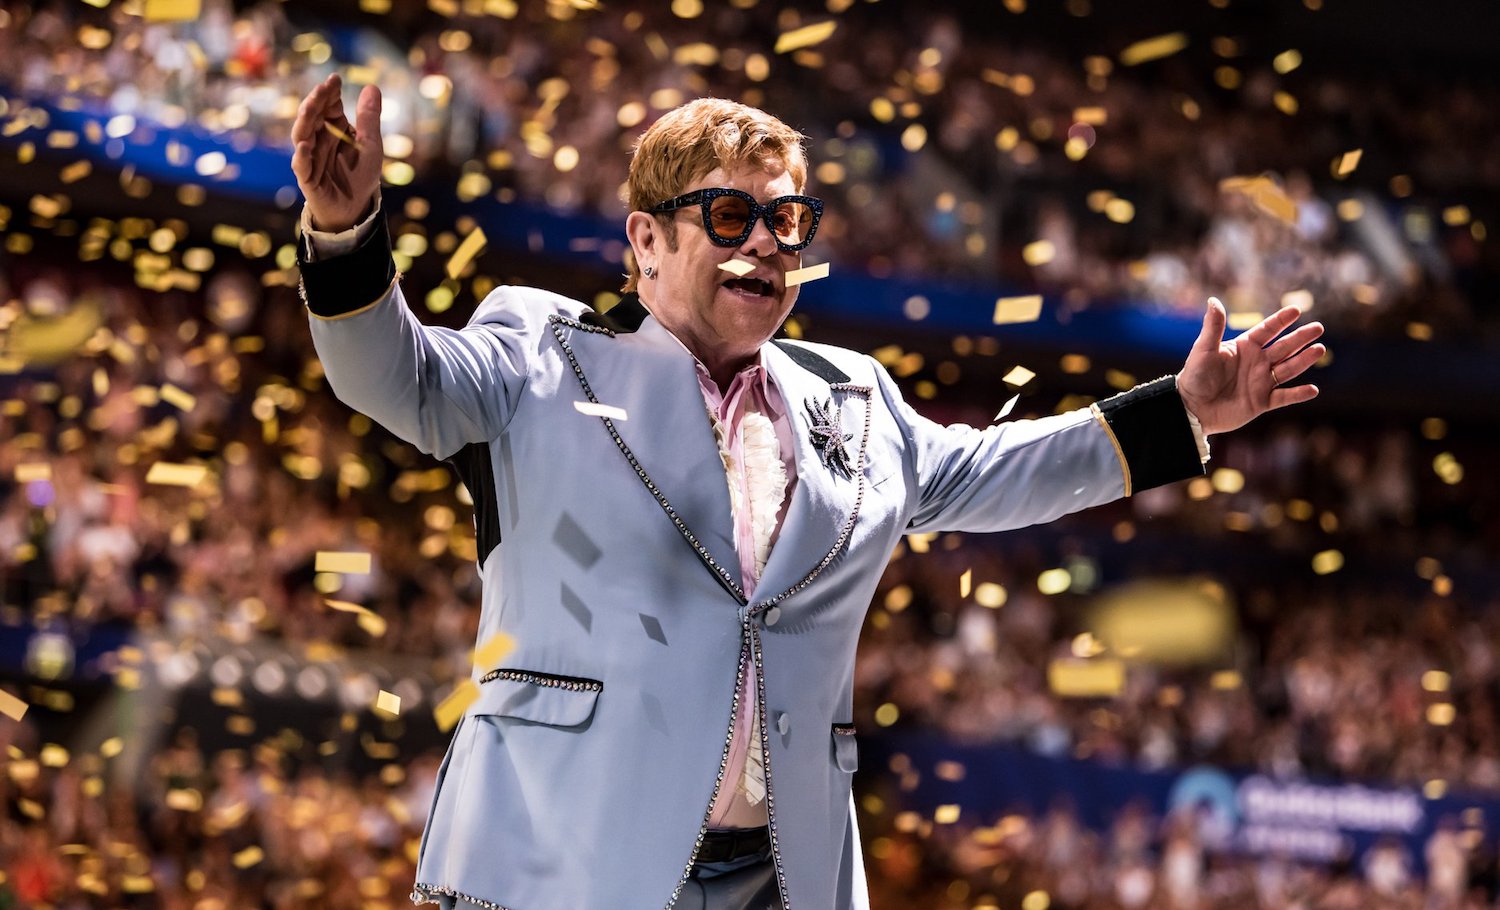 Elton John becomes the oldest artist in history to top the ARIA Singles Chart